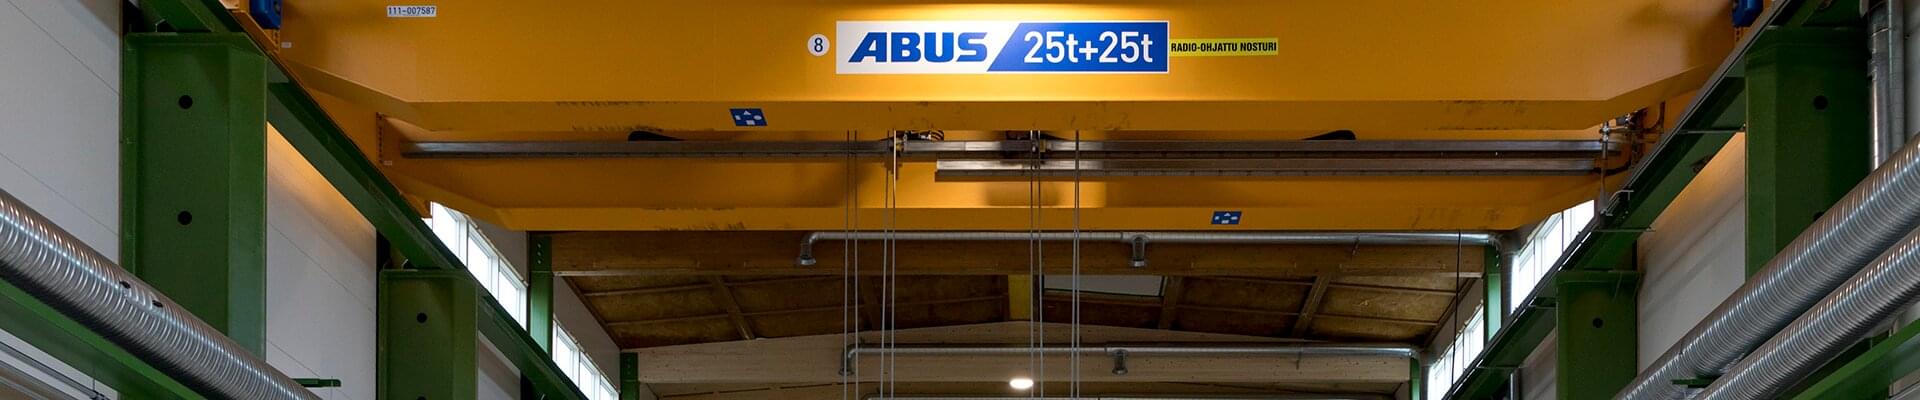 ABUS cranes in new metal manufacturer production of a Finnish company